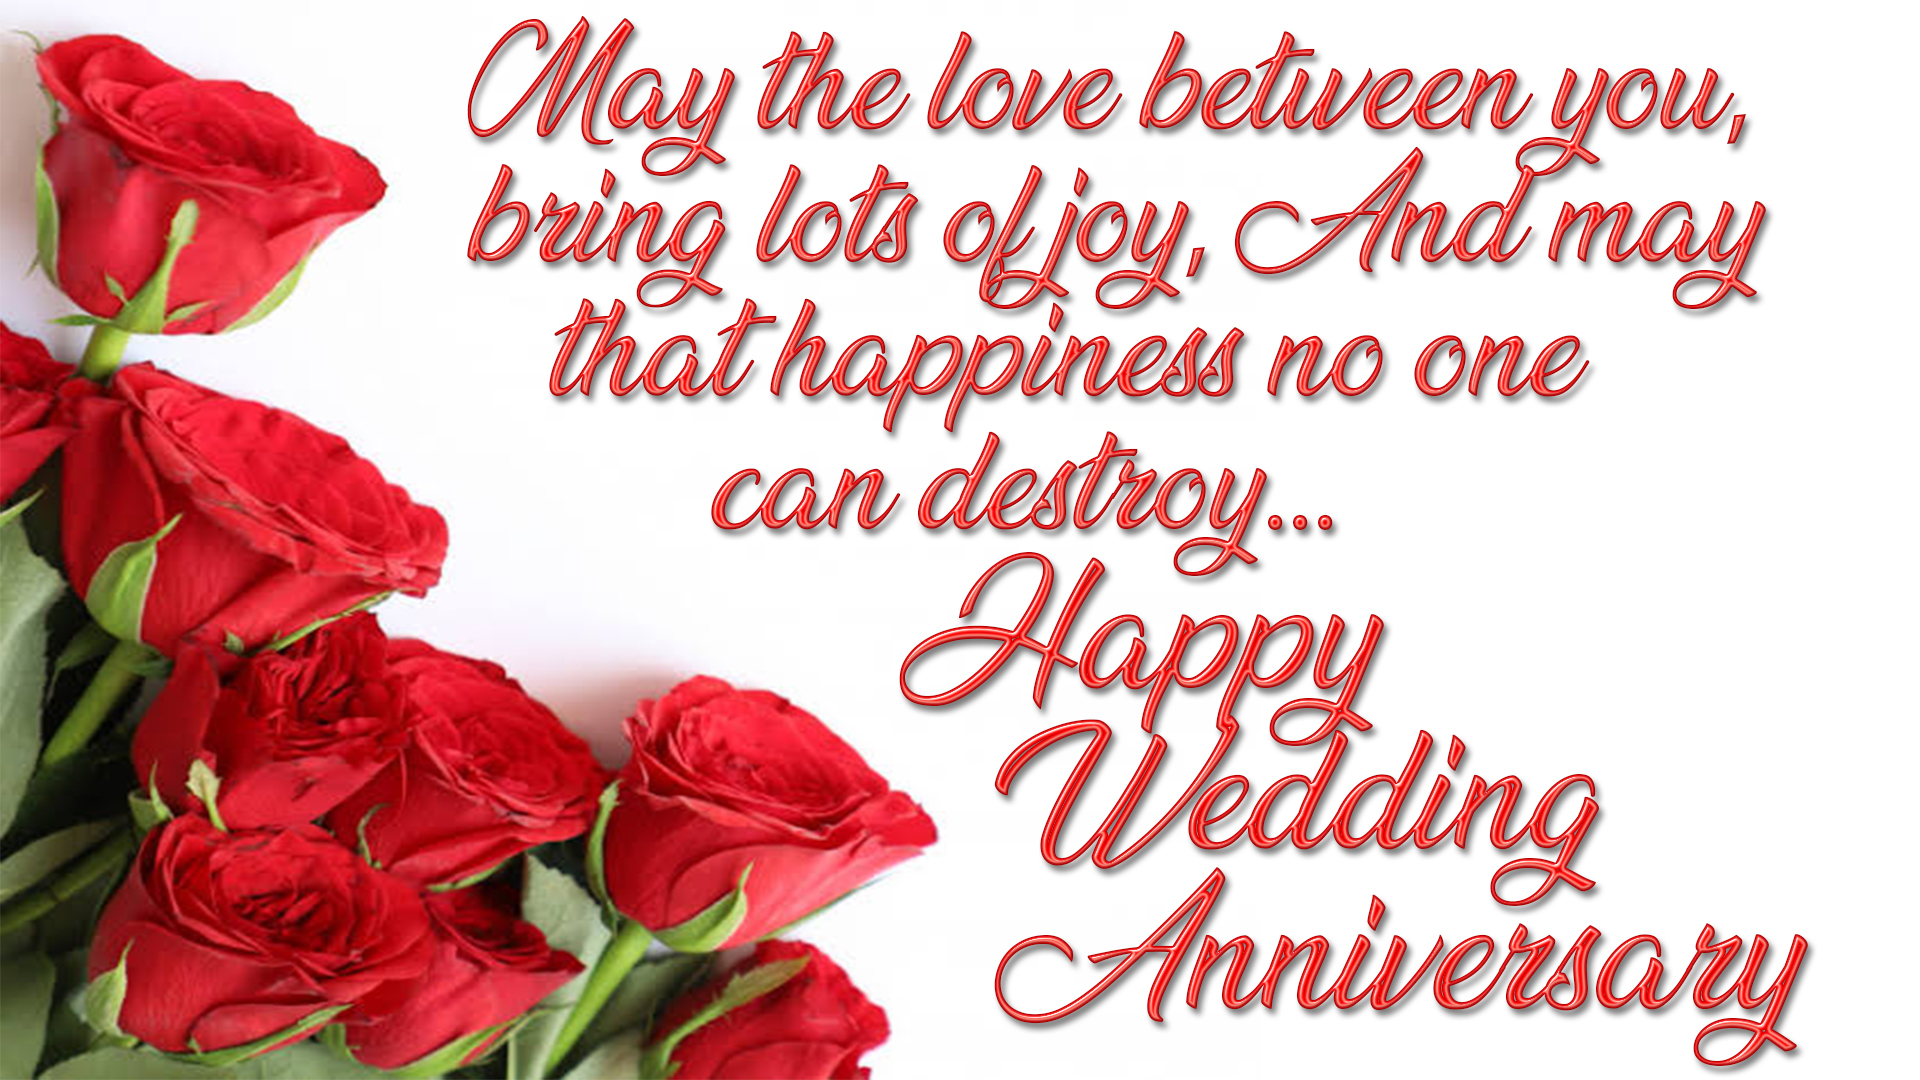 happy anniversary wishes for friends